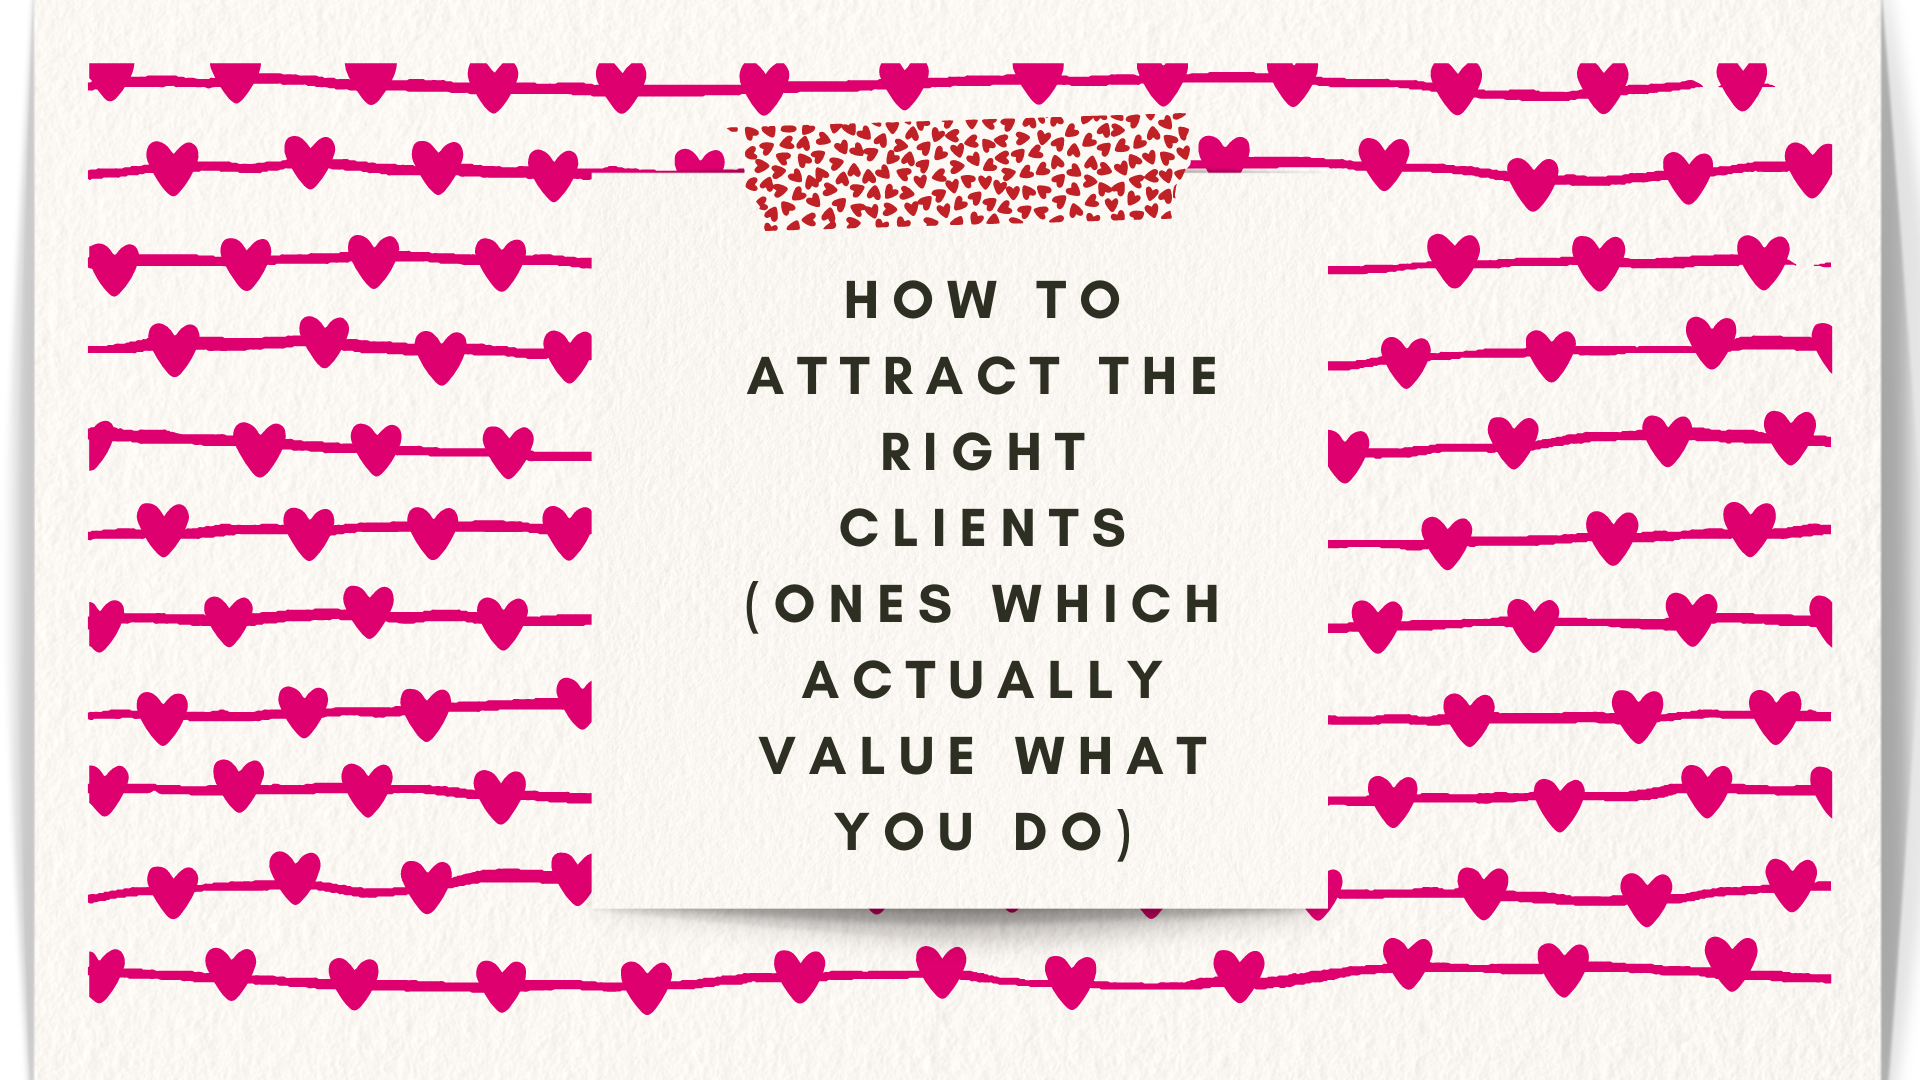 How to attract the right clients (ones who value what you do)